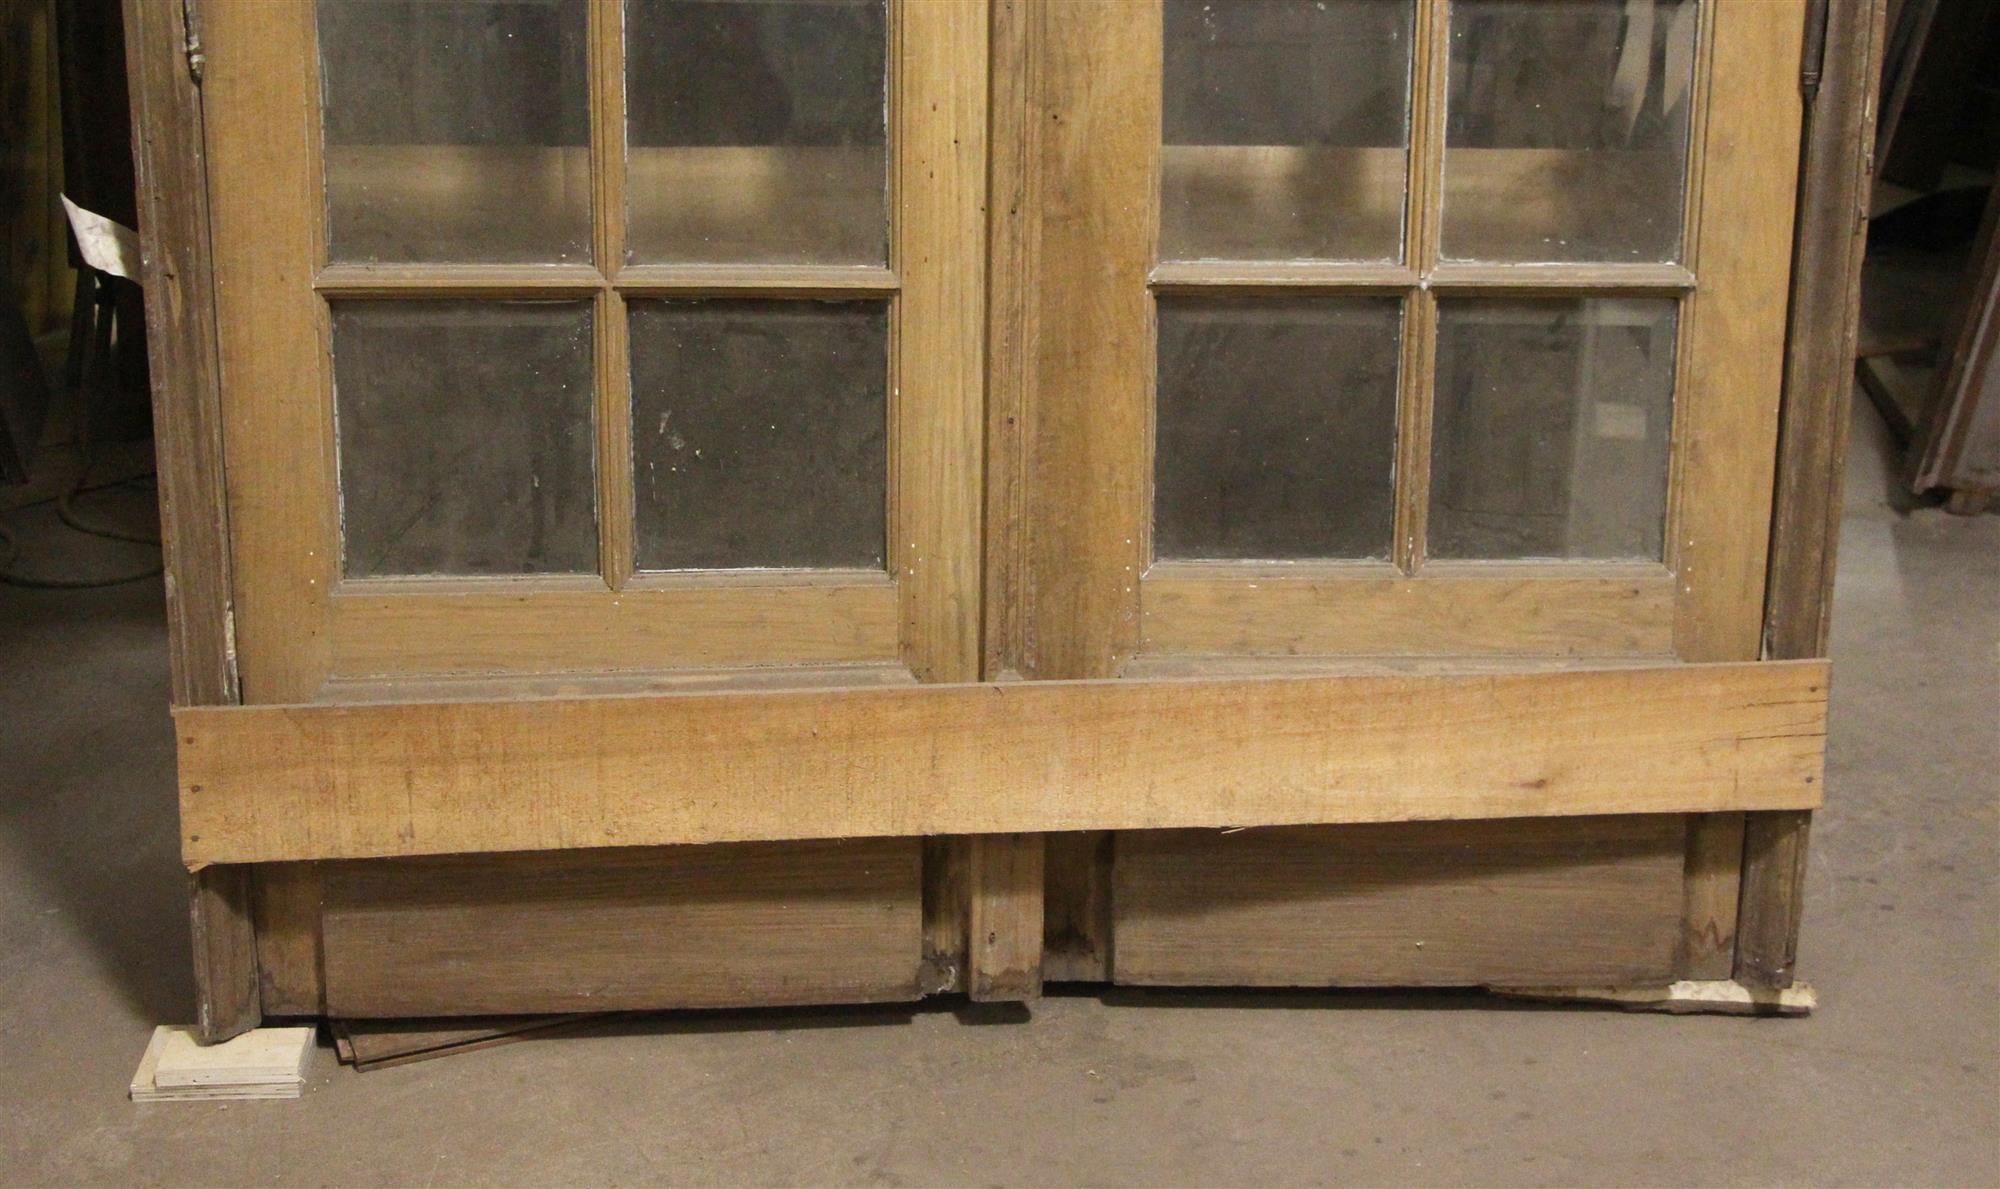 Argentine 1940s Double Doors in Frame from Argentina Made of Spanish Cedar